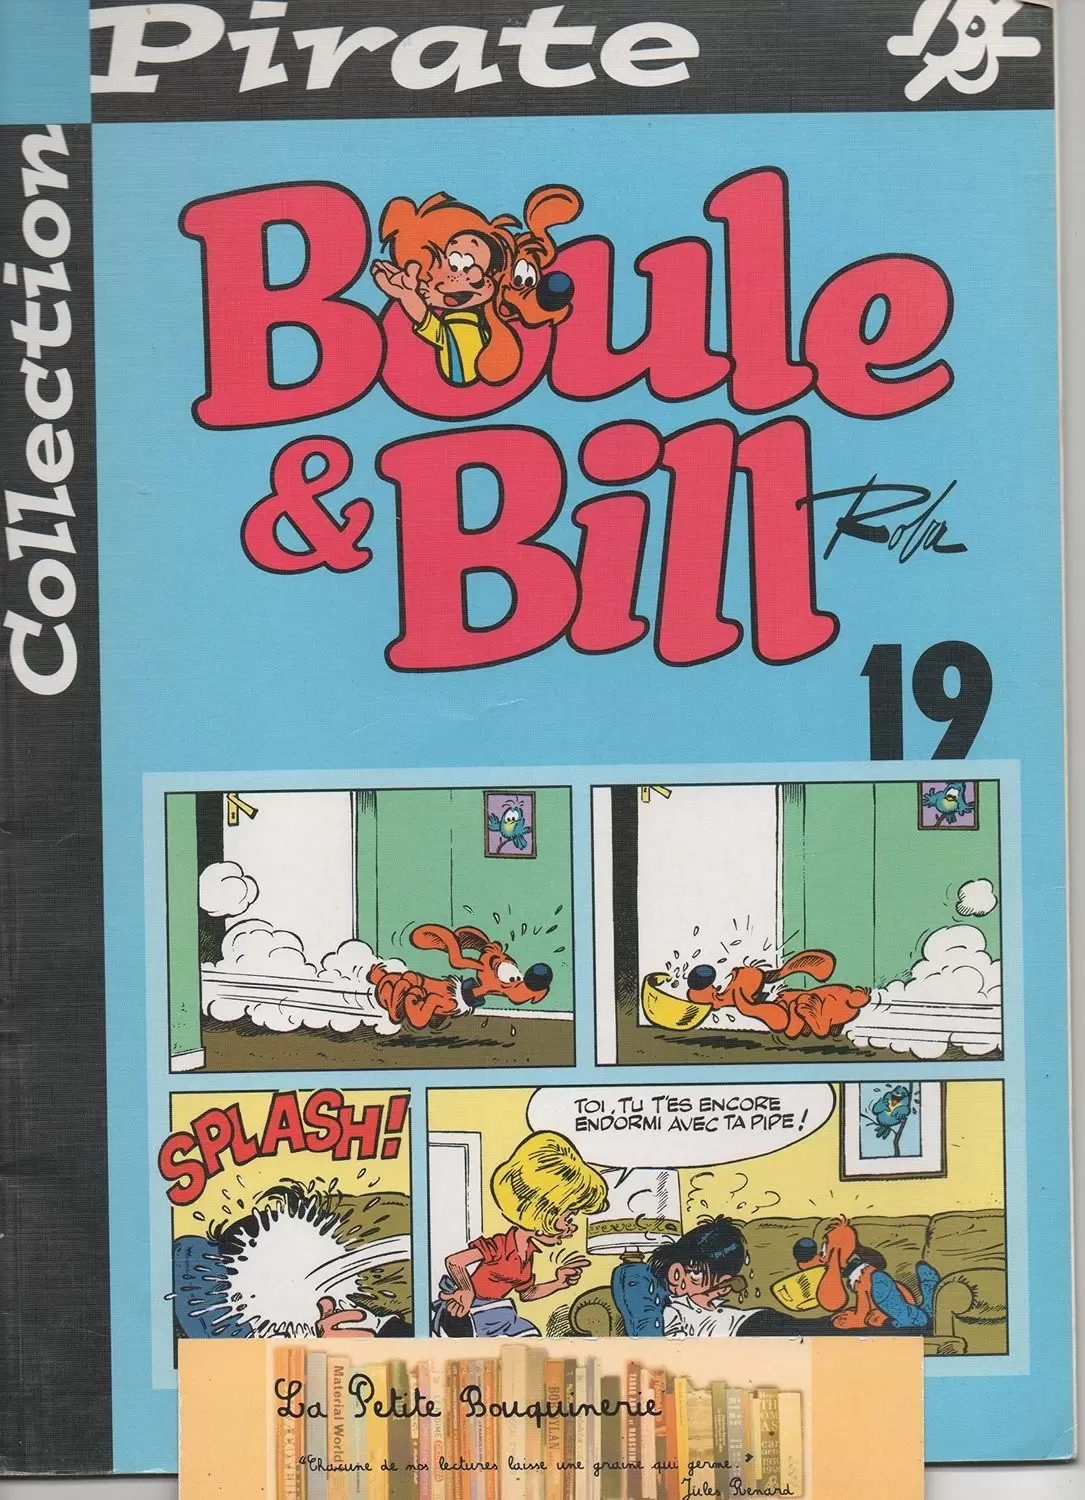 Collection Pirate - Boule et Bill N°19